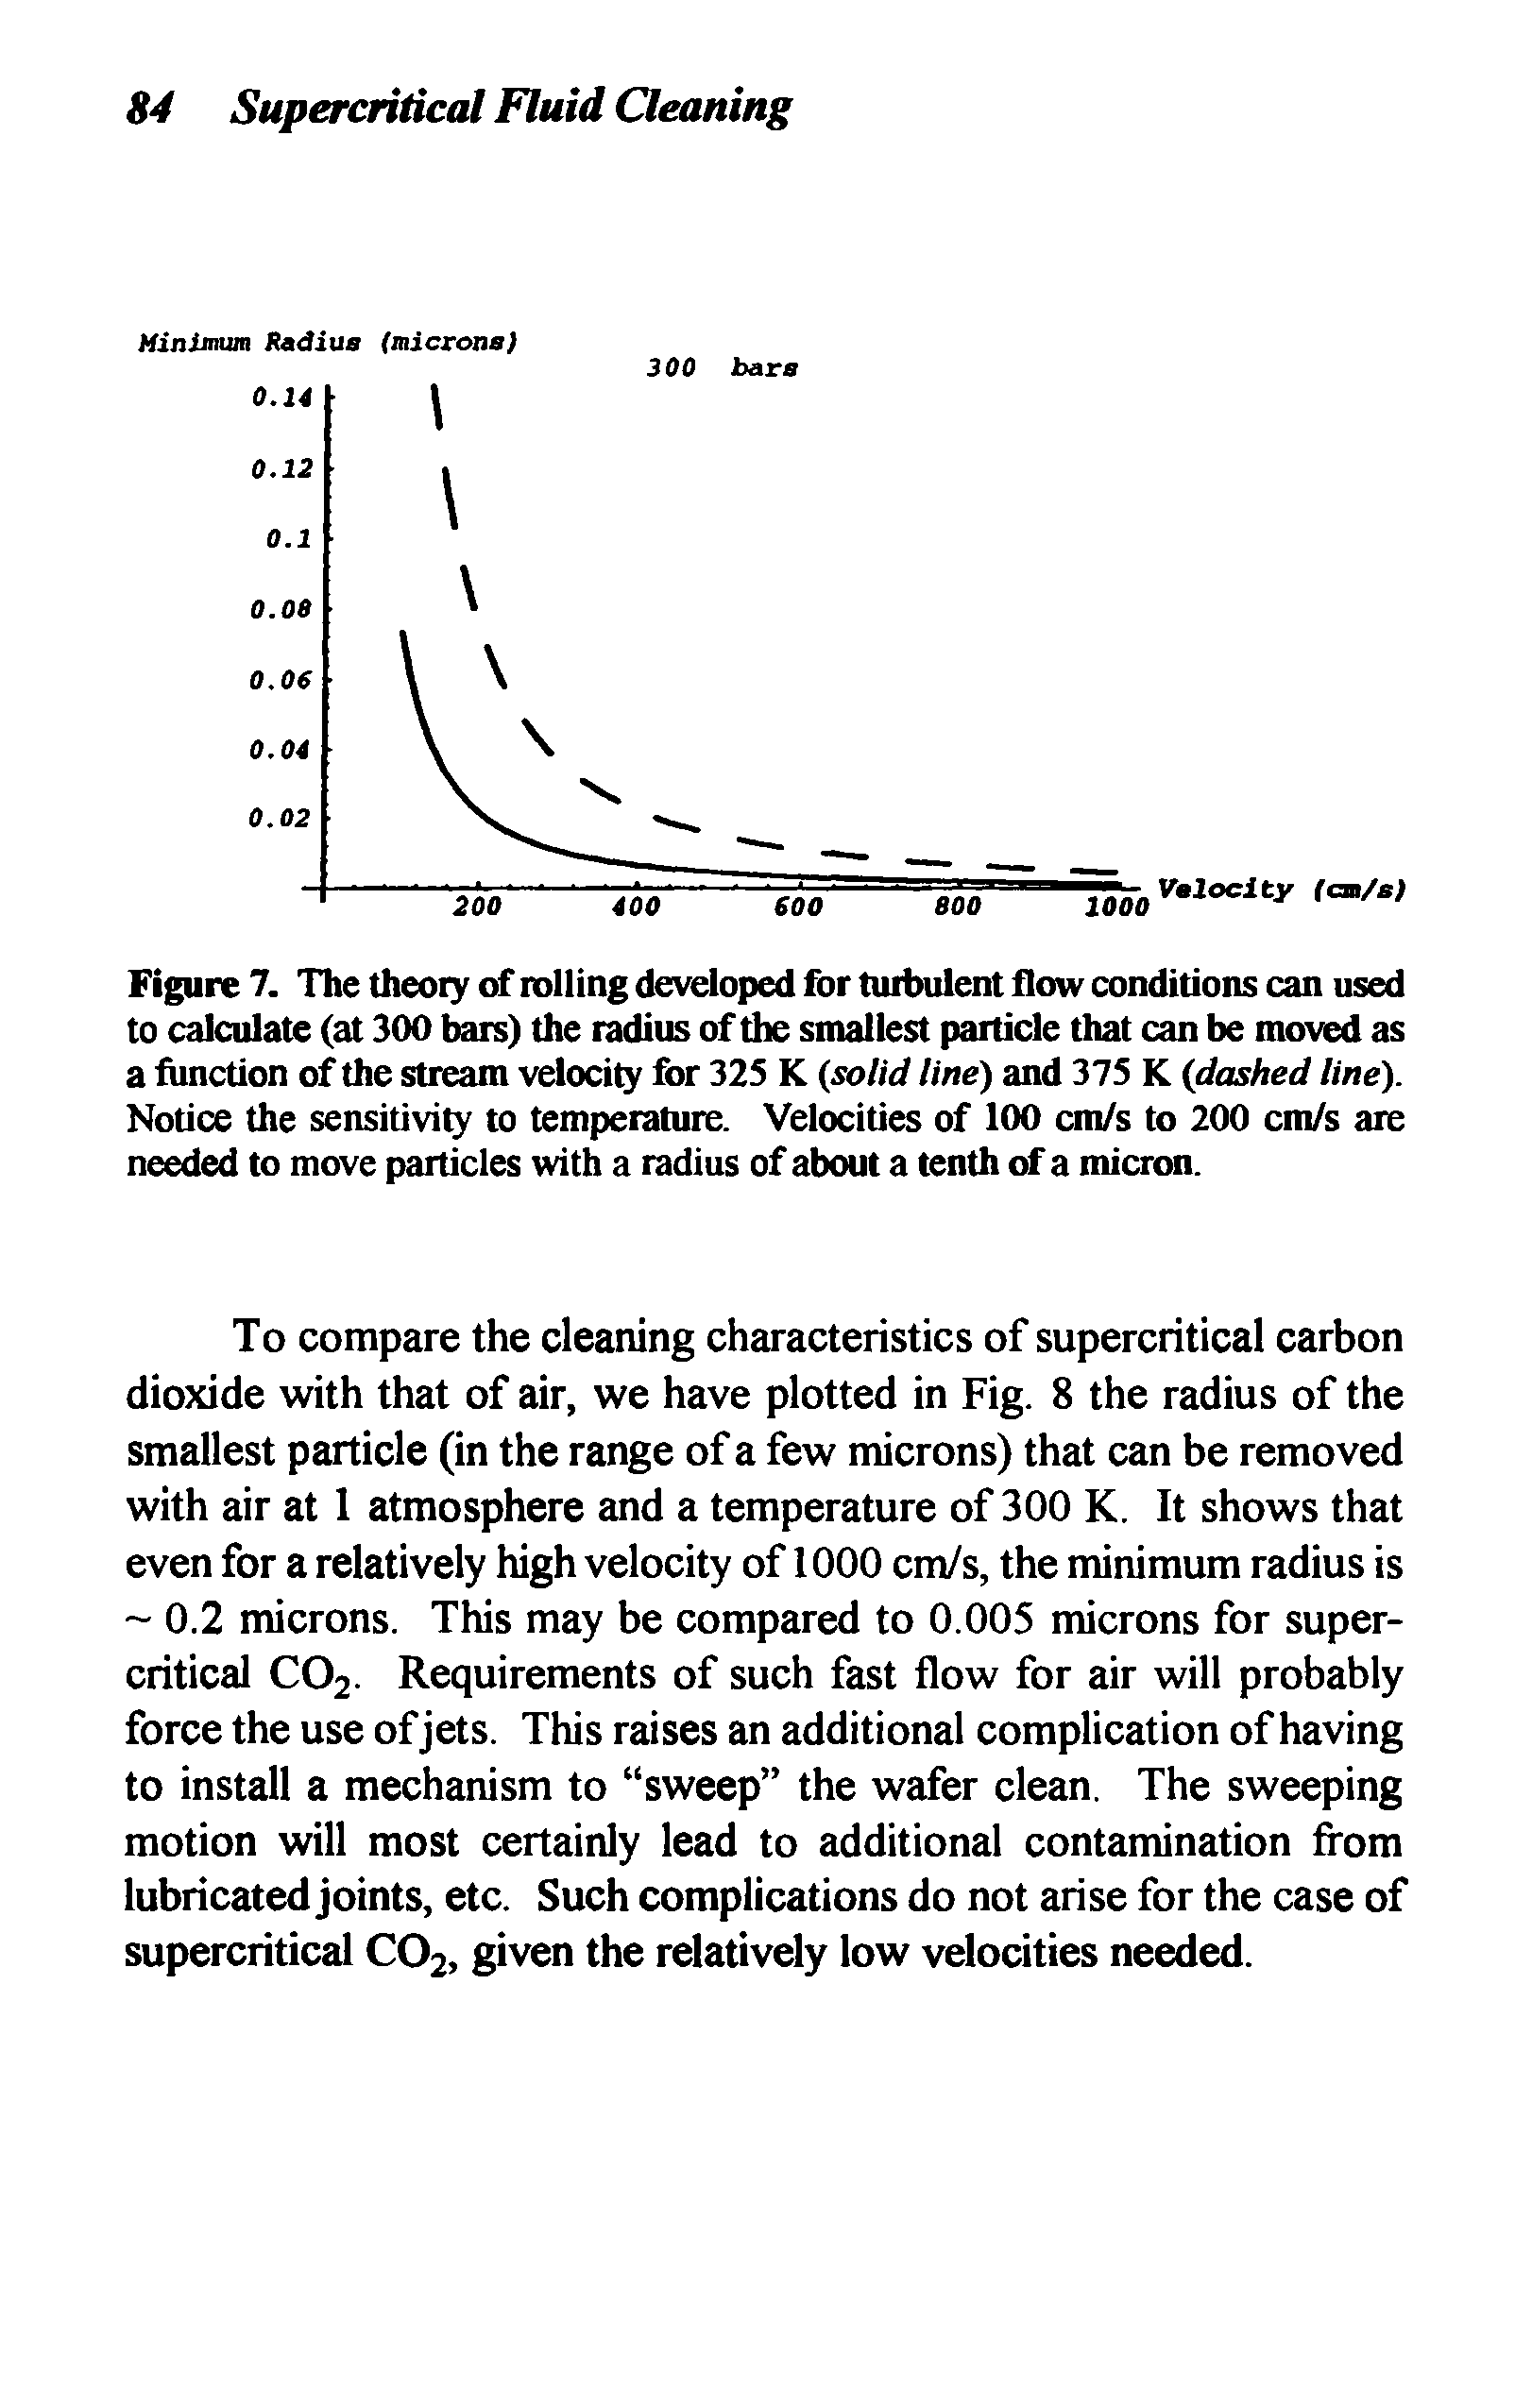 Figure 7. The theoiy of rolling developed for turbulent flow conditions can used to calculate (at 300 bars) the radius of the smallest particle that can be moved as a function of the stream velocity for 325 K solid line) and 375 K dashed line). Notice the sensitivity to temperature. Velocities of 100 cm/s to 200 cm/s are needed to move particles with a radius of about a tenth of a micron.